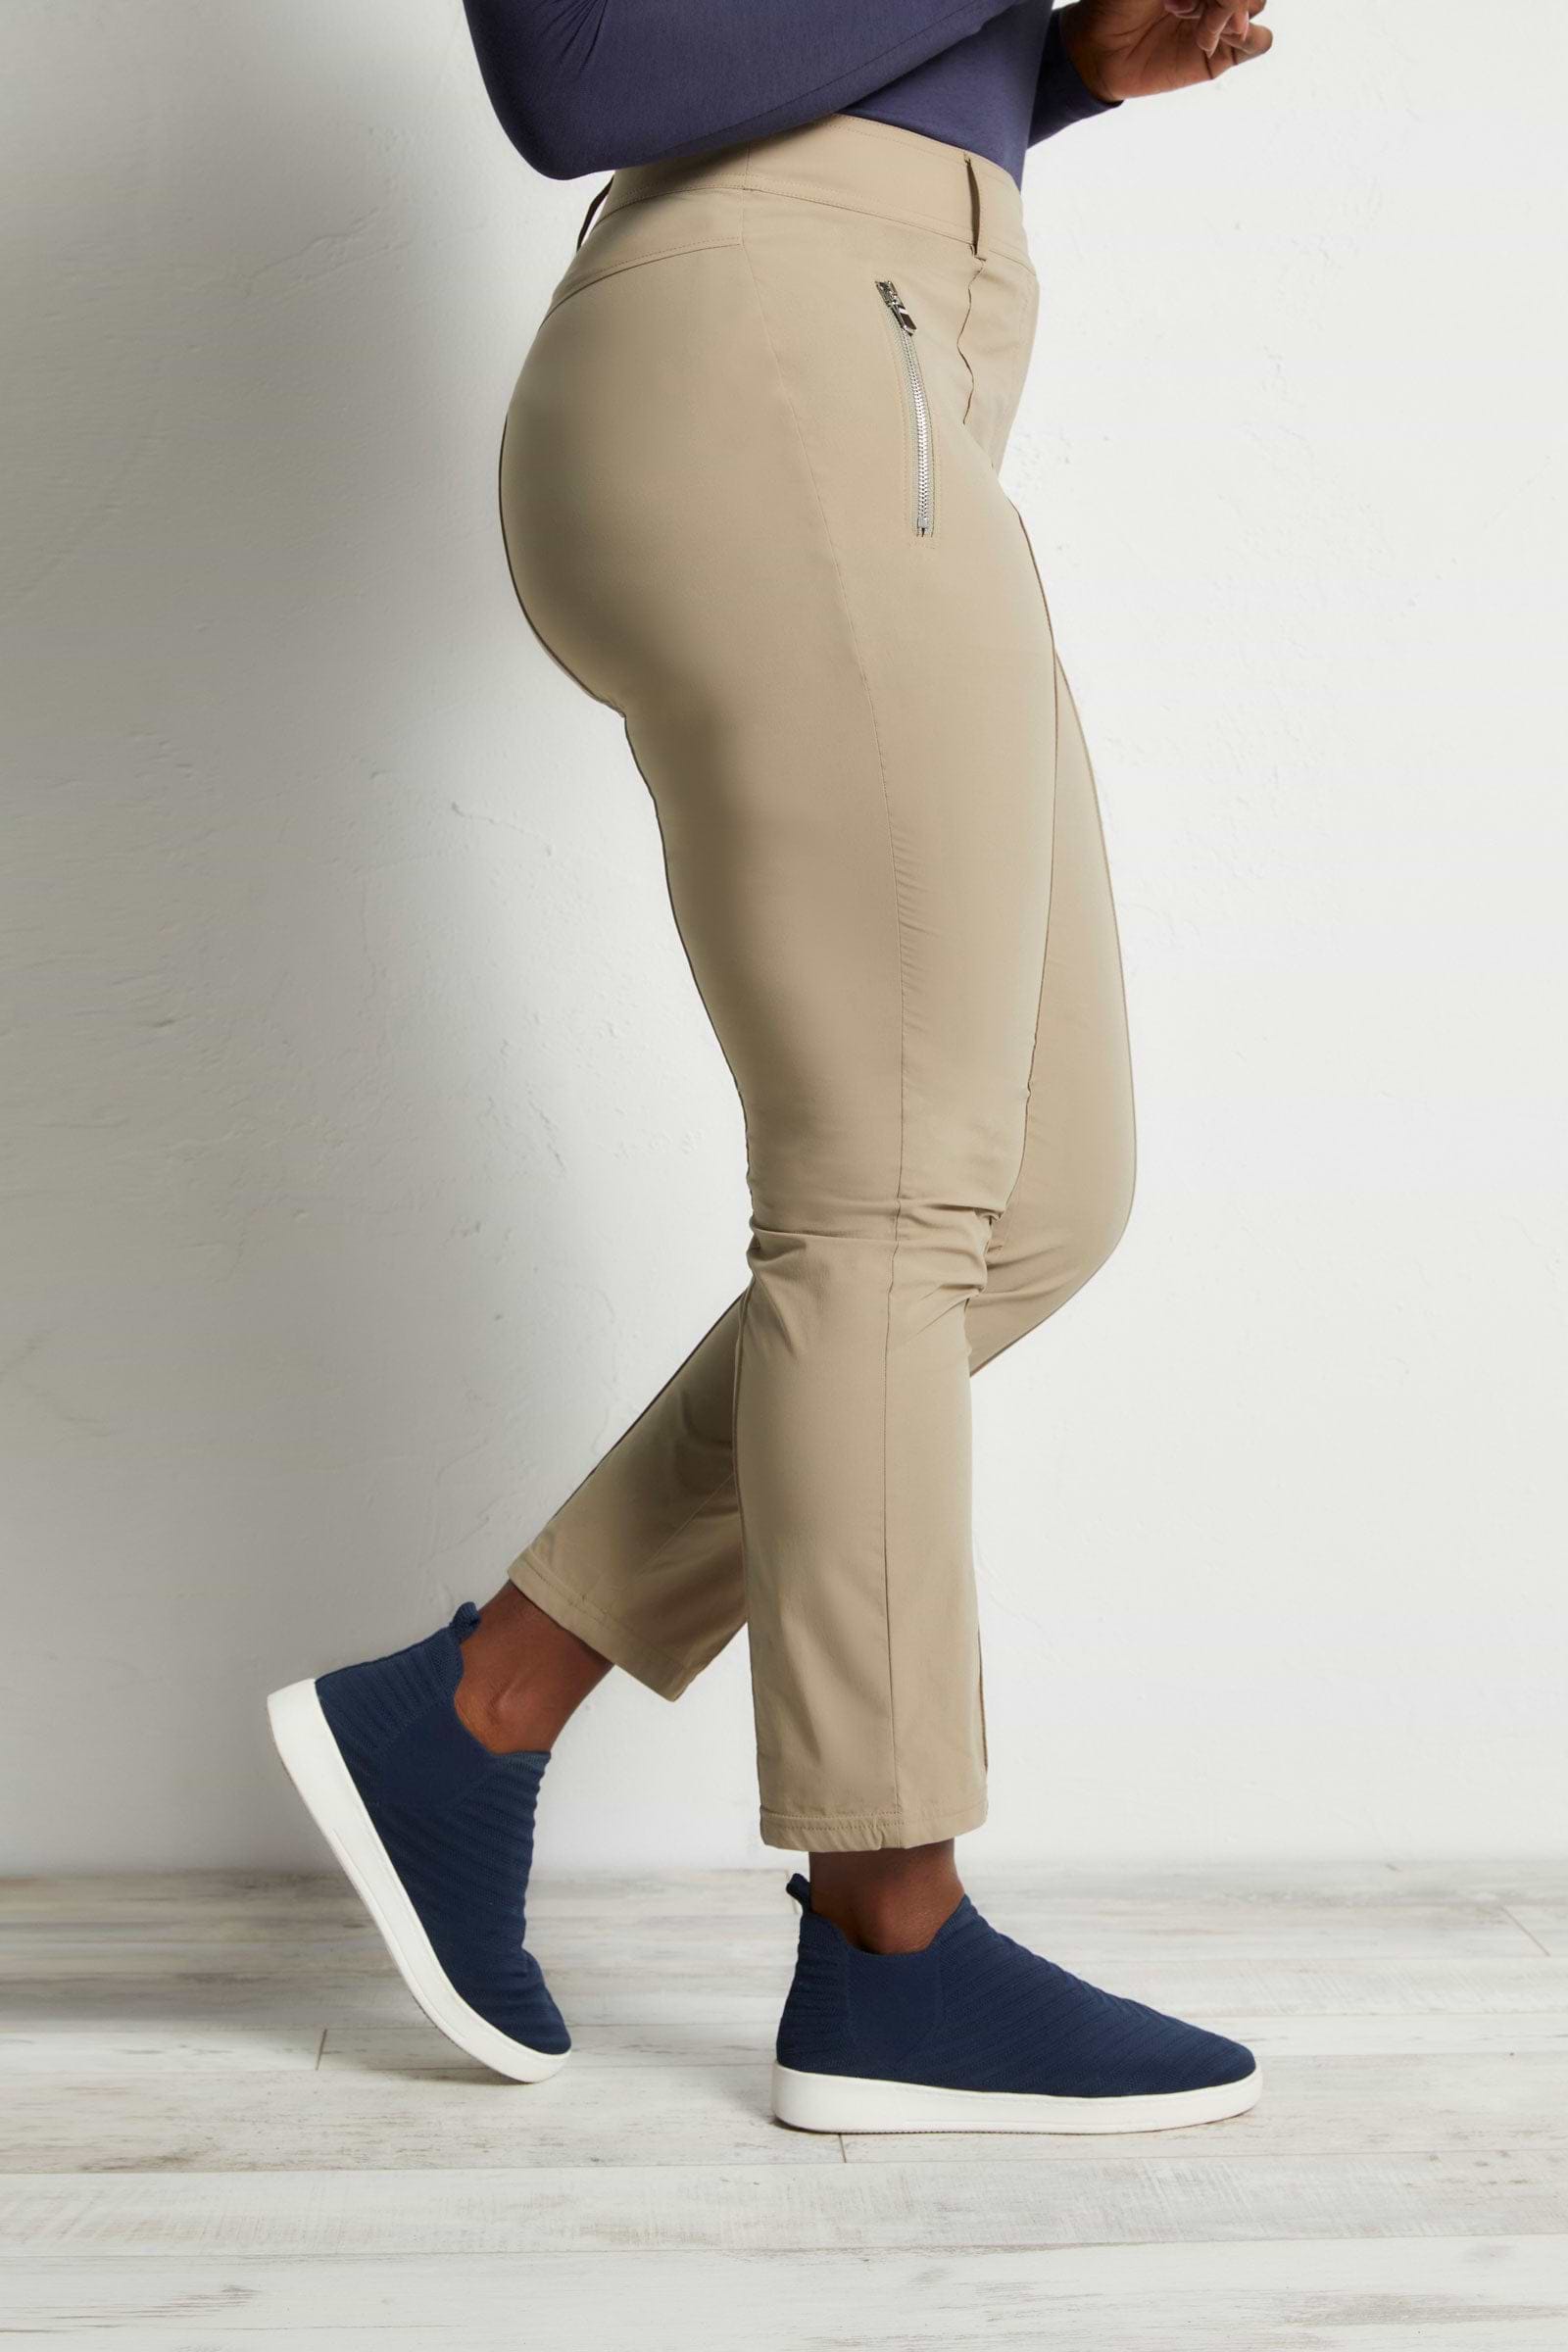 The Best Travel Pants. Side Profile of the Peggy Zippered Pant in Khaki